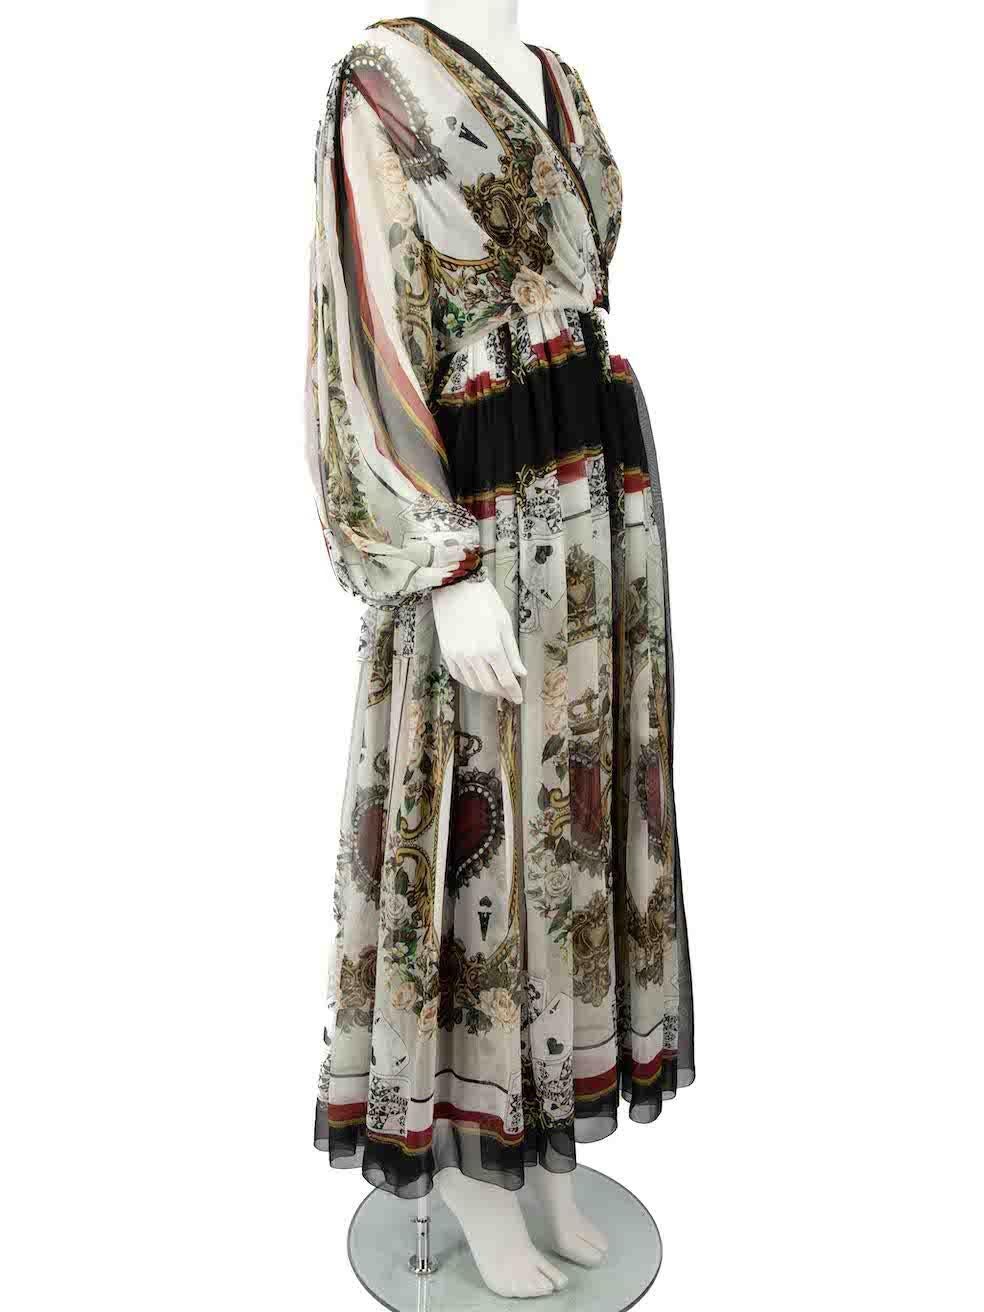 CONDITION is Very good. Hardly any visible wear to dress is evident on this used Dolce & Gabbana designer resale item.
 
 
 
 Details
 
 
 Multicolour
 
 Silk
 
 Dress
 
 Queen of hearts print
 
 Long puff sleeves
 
 Sheer
 
 Plunge neck
 
 Maxi
 
